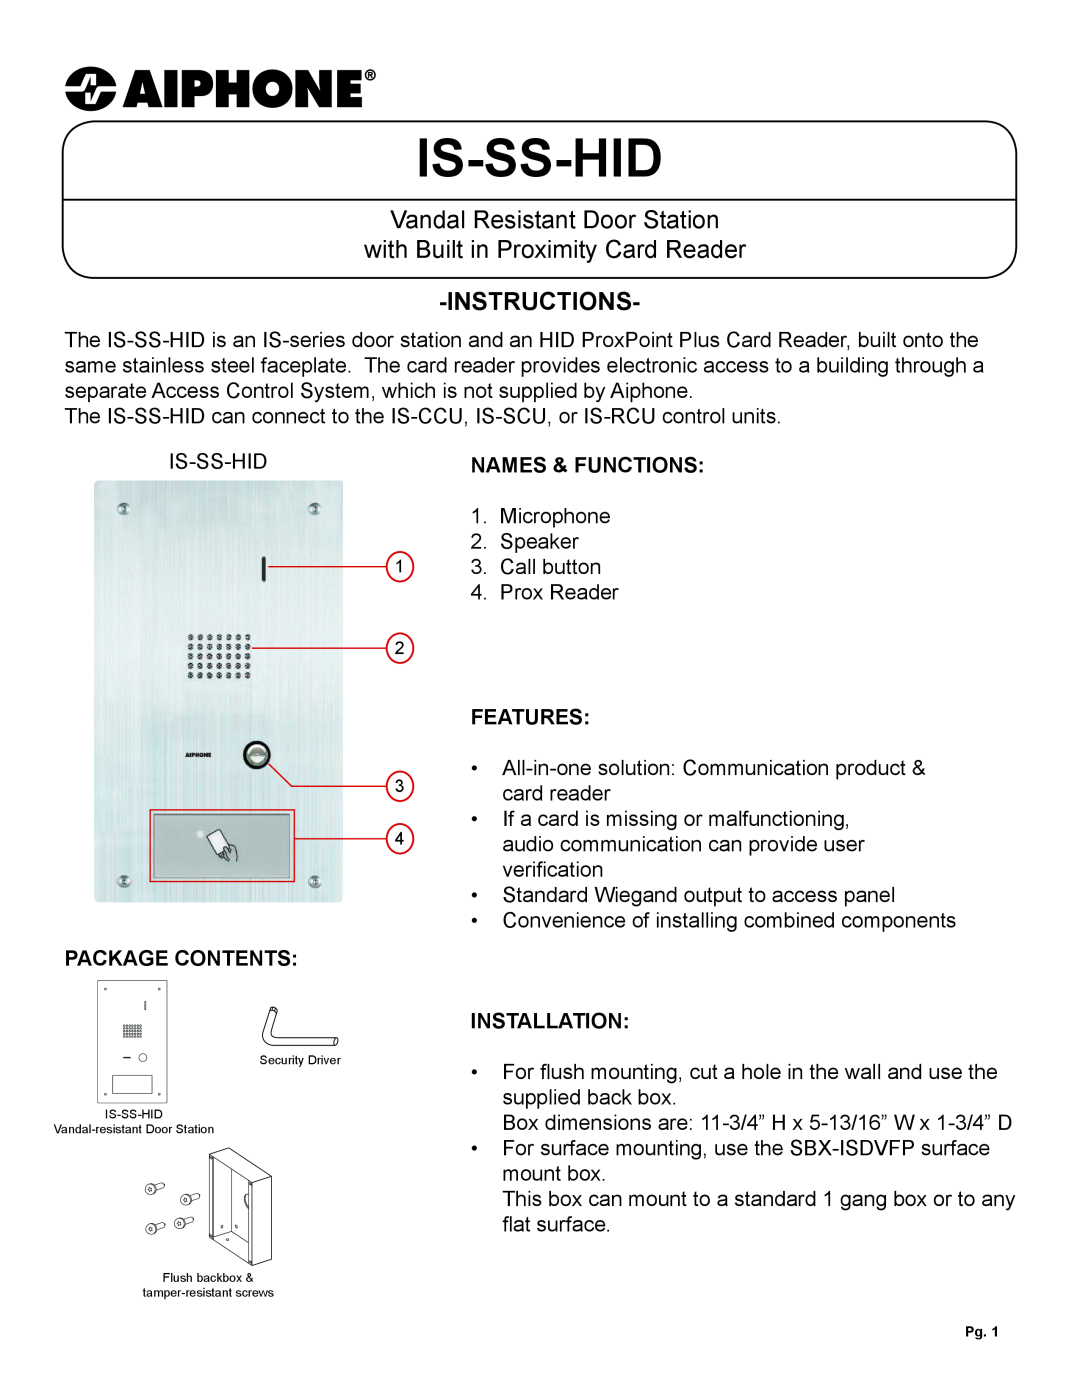 Aiphone IS-SS-HID dimensions Package Contents, Names & Functions, Features, Installation, Is-Ss-Hid, Instructions 